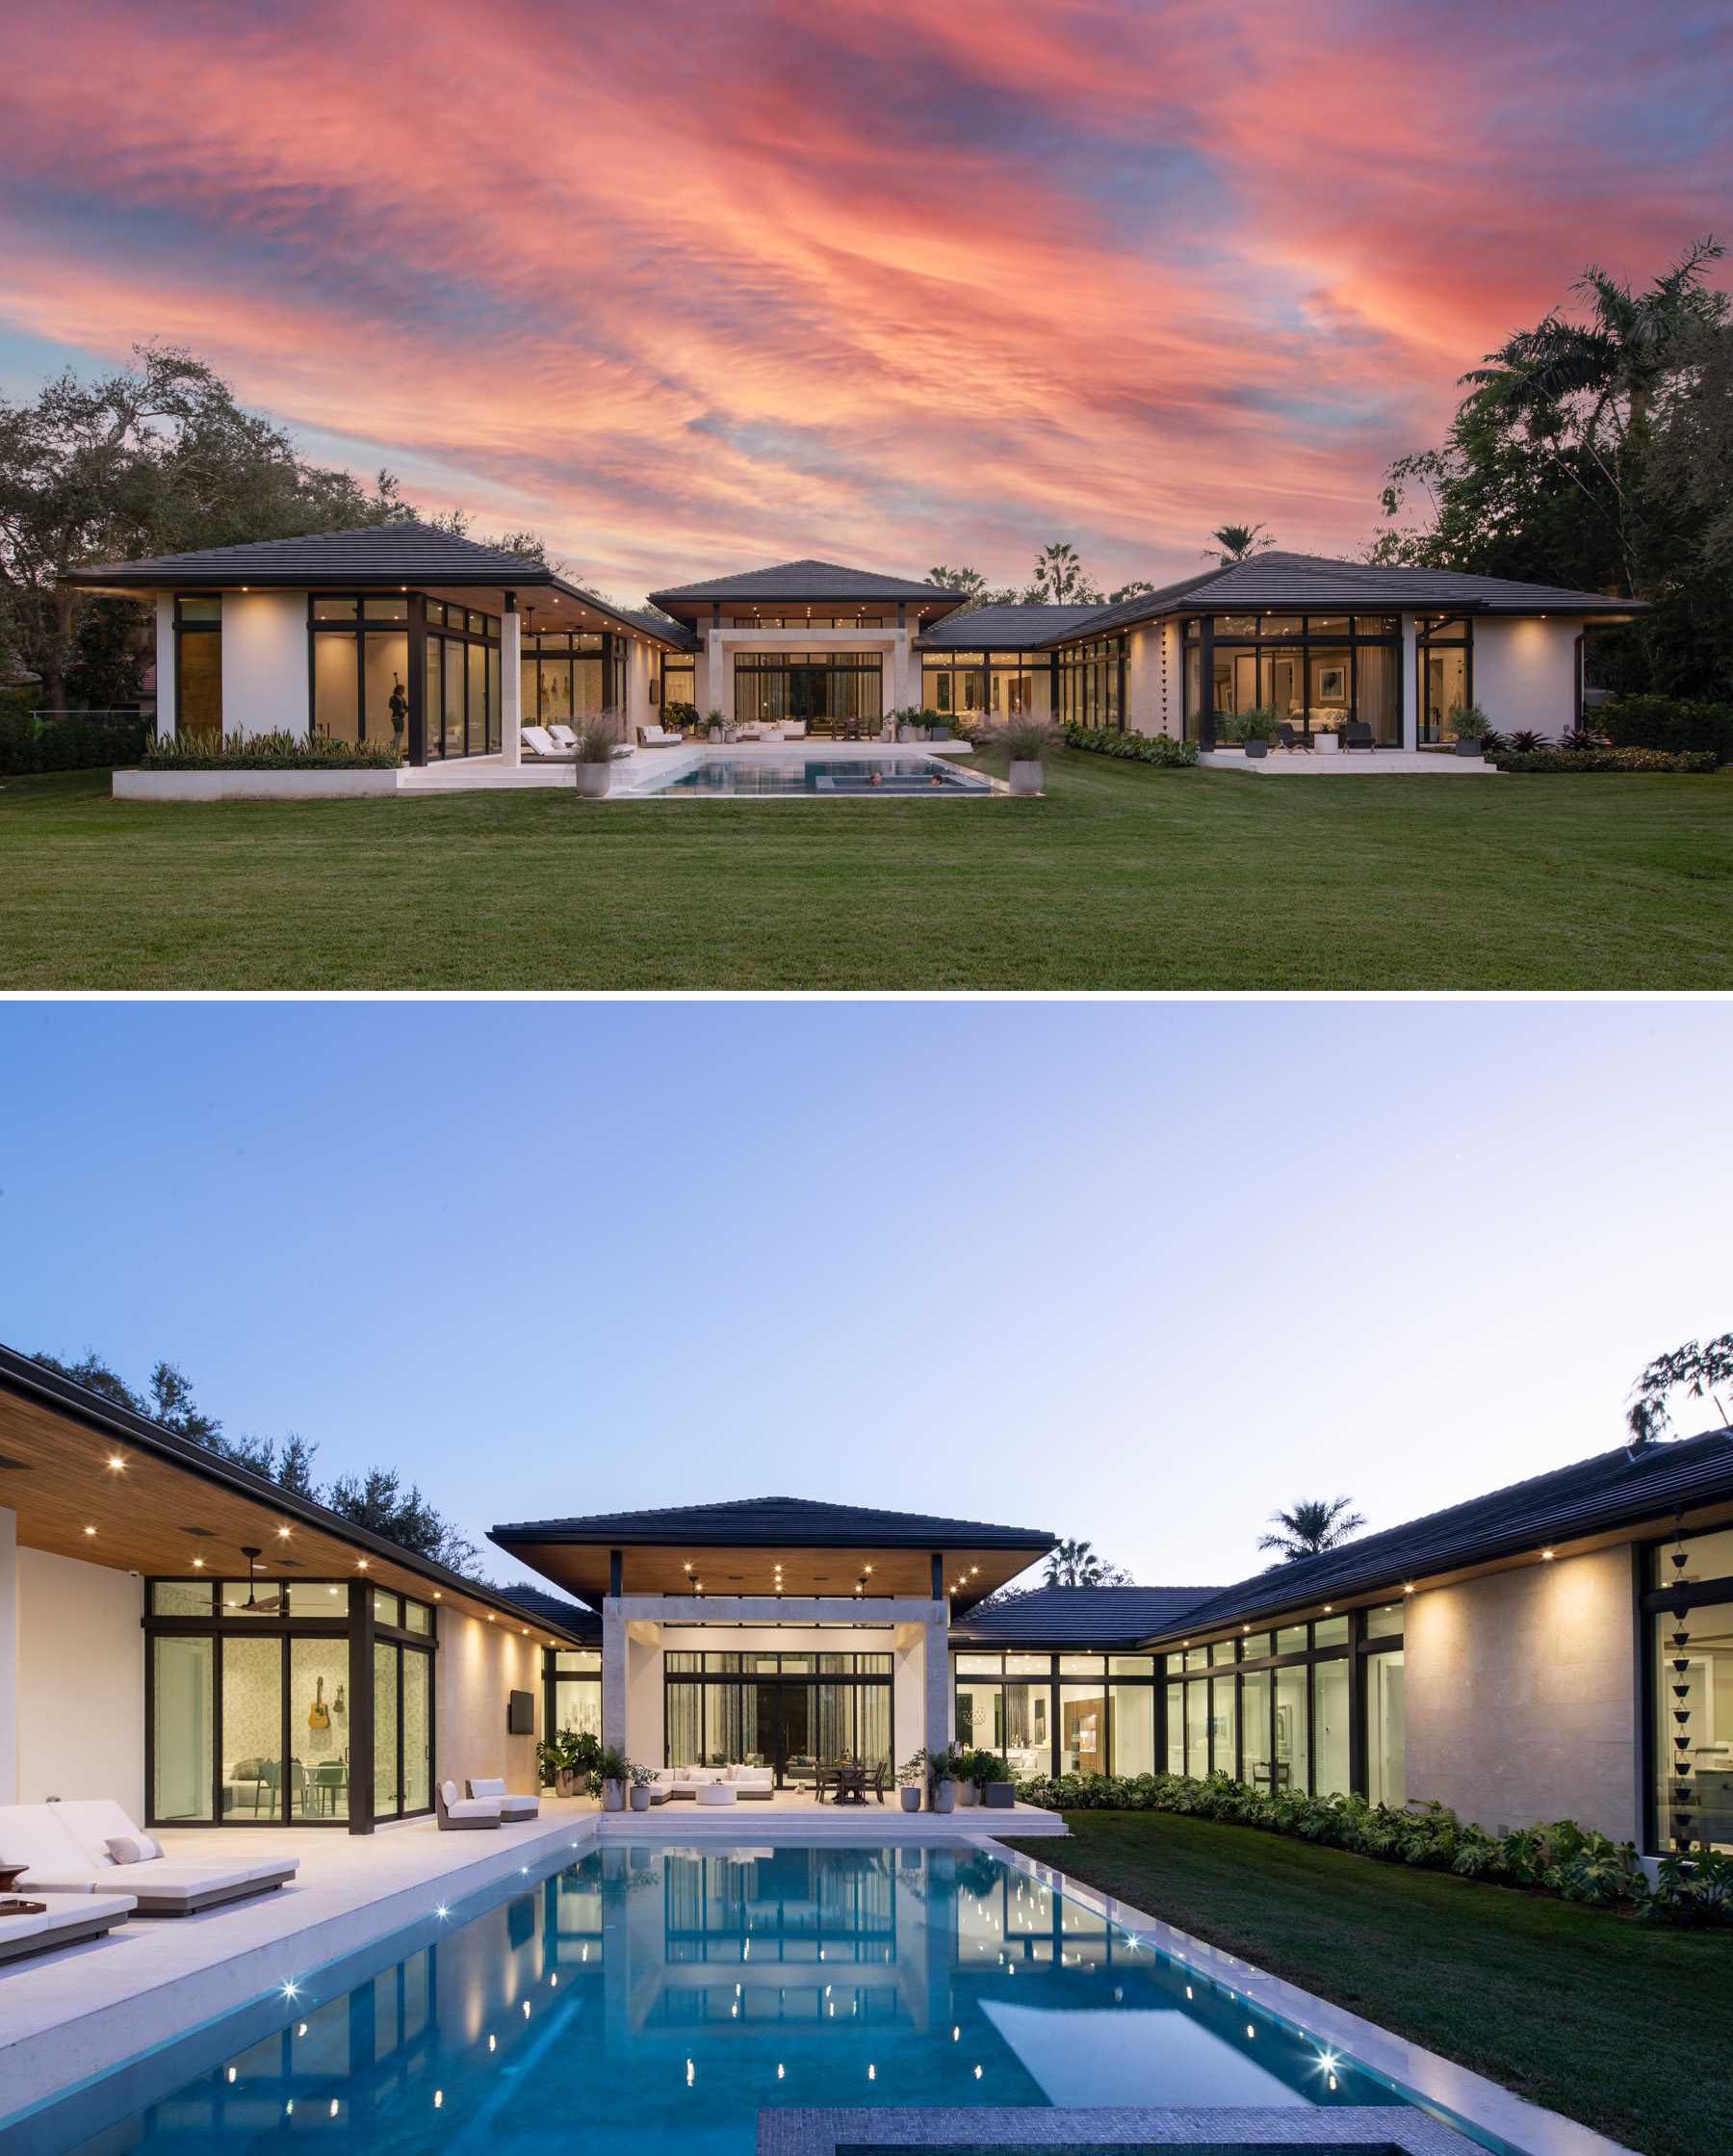 The rear of this contemporary home shows the U-shape design, with the bedrooms and social areas all having views of the swimming pool through floor-to-ceiling windows.